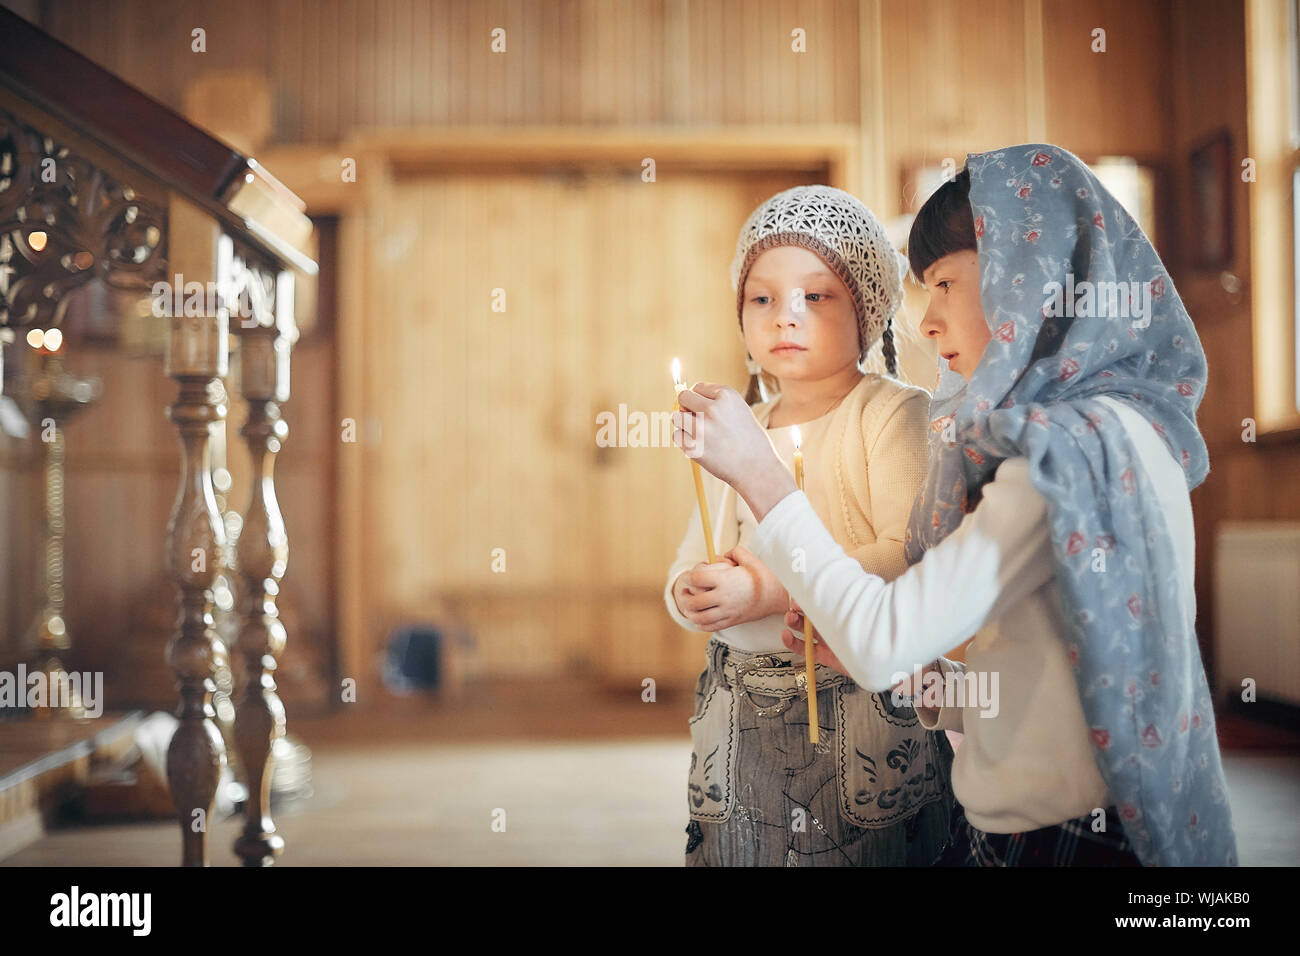 Two Russian women in winter clothes against Orthodox monastery